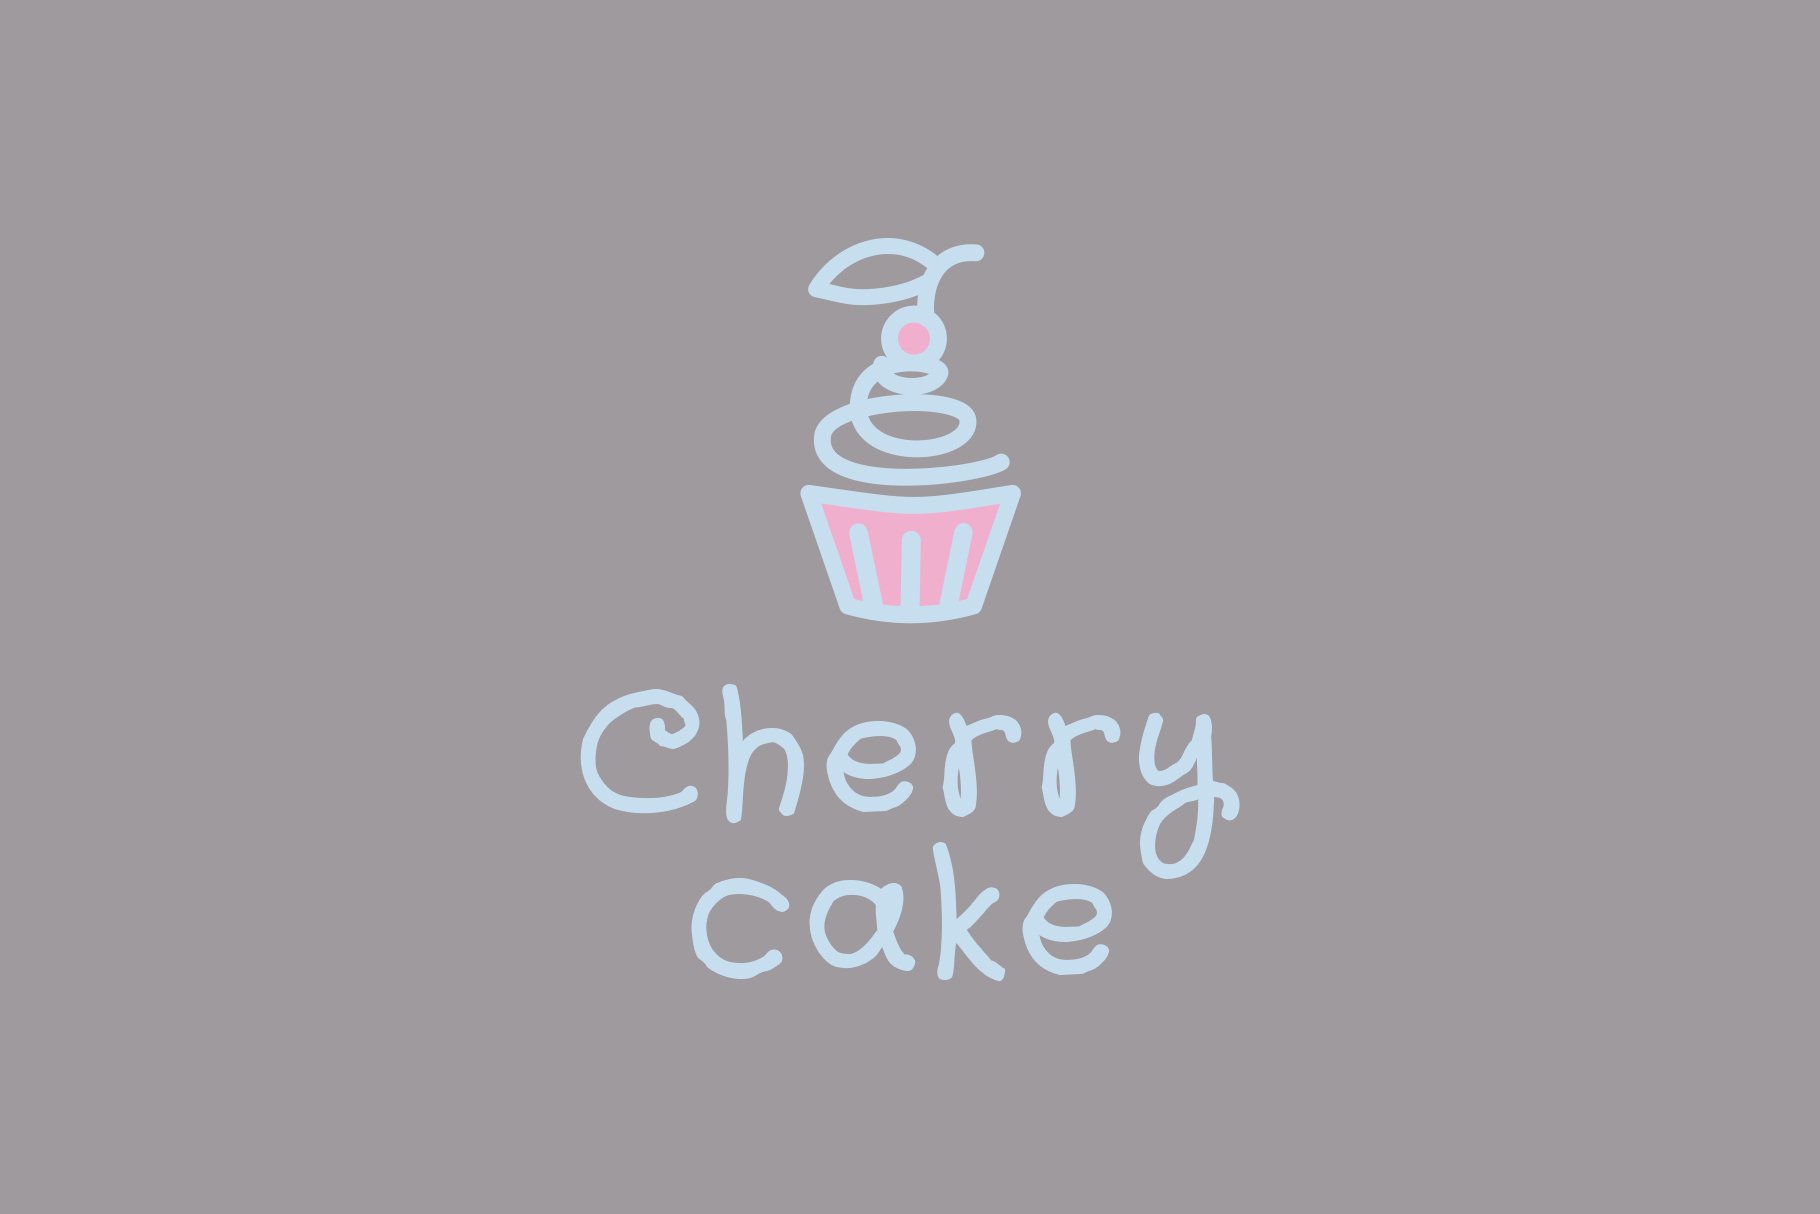 Free: Bakery cake logo design Free Vector - nohat.cc